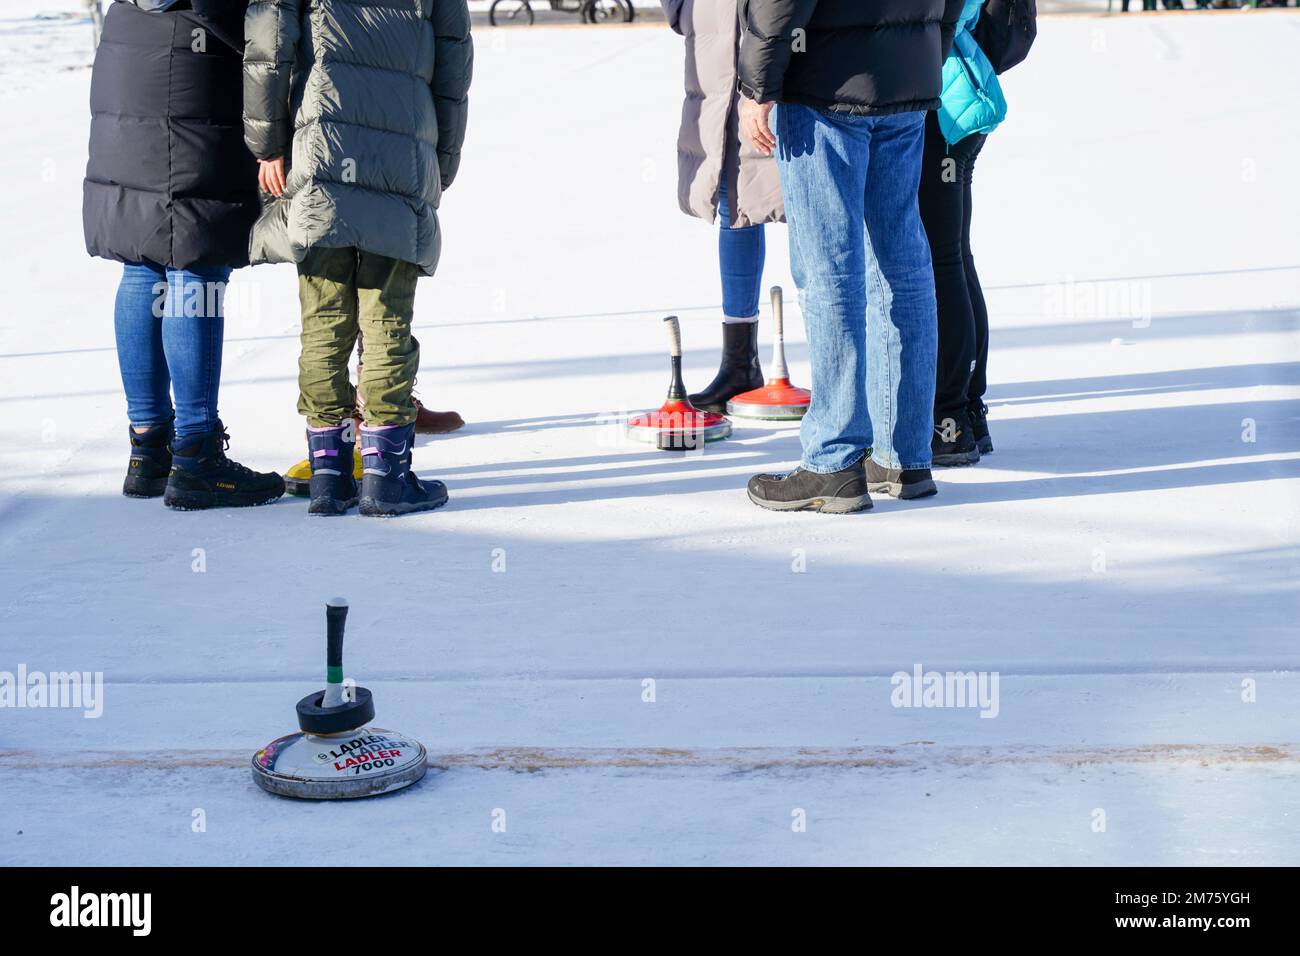 Seefeld, Austria - December 2022: A family enjoys a game of ice curling at the Seefeld ski resort in Tyrol, Austria Stock Photo